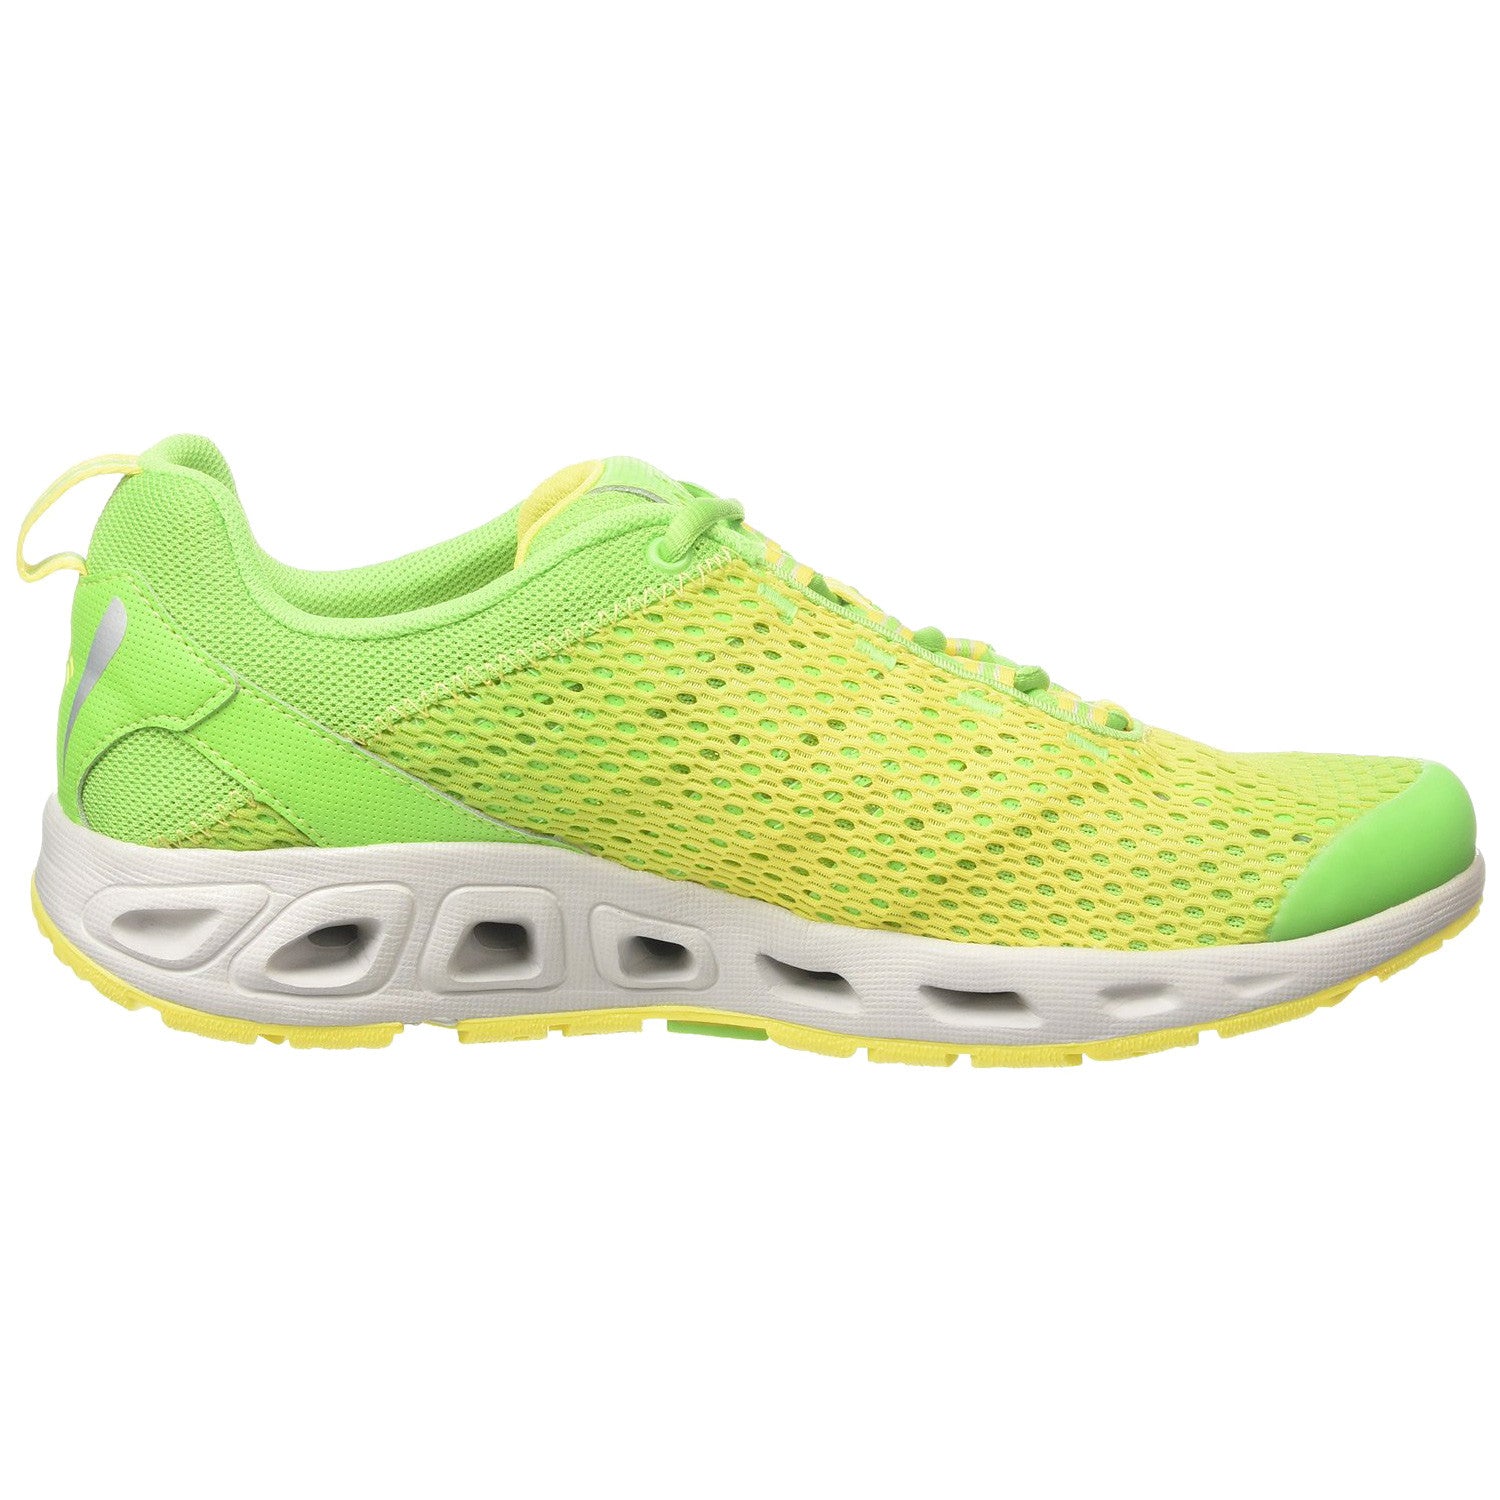 columbia drainmaker shoes